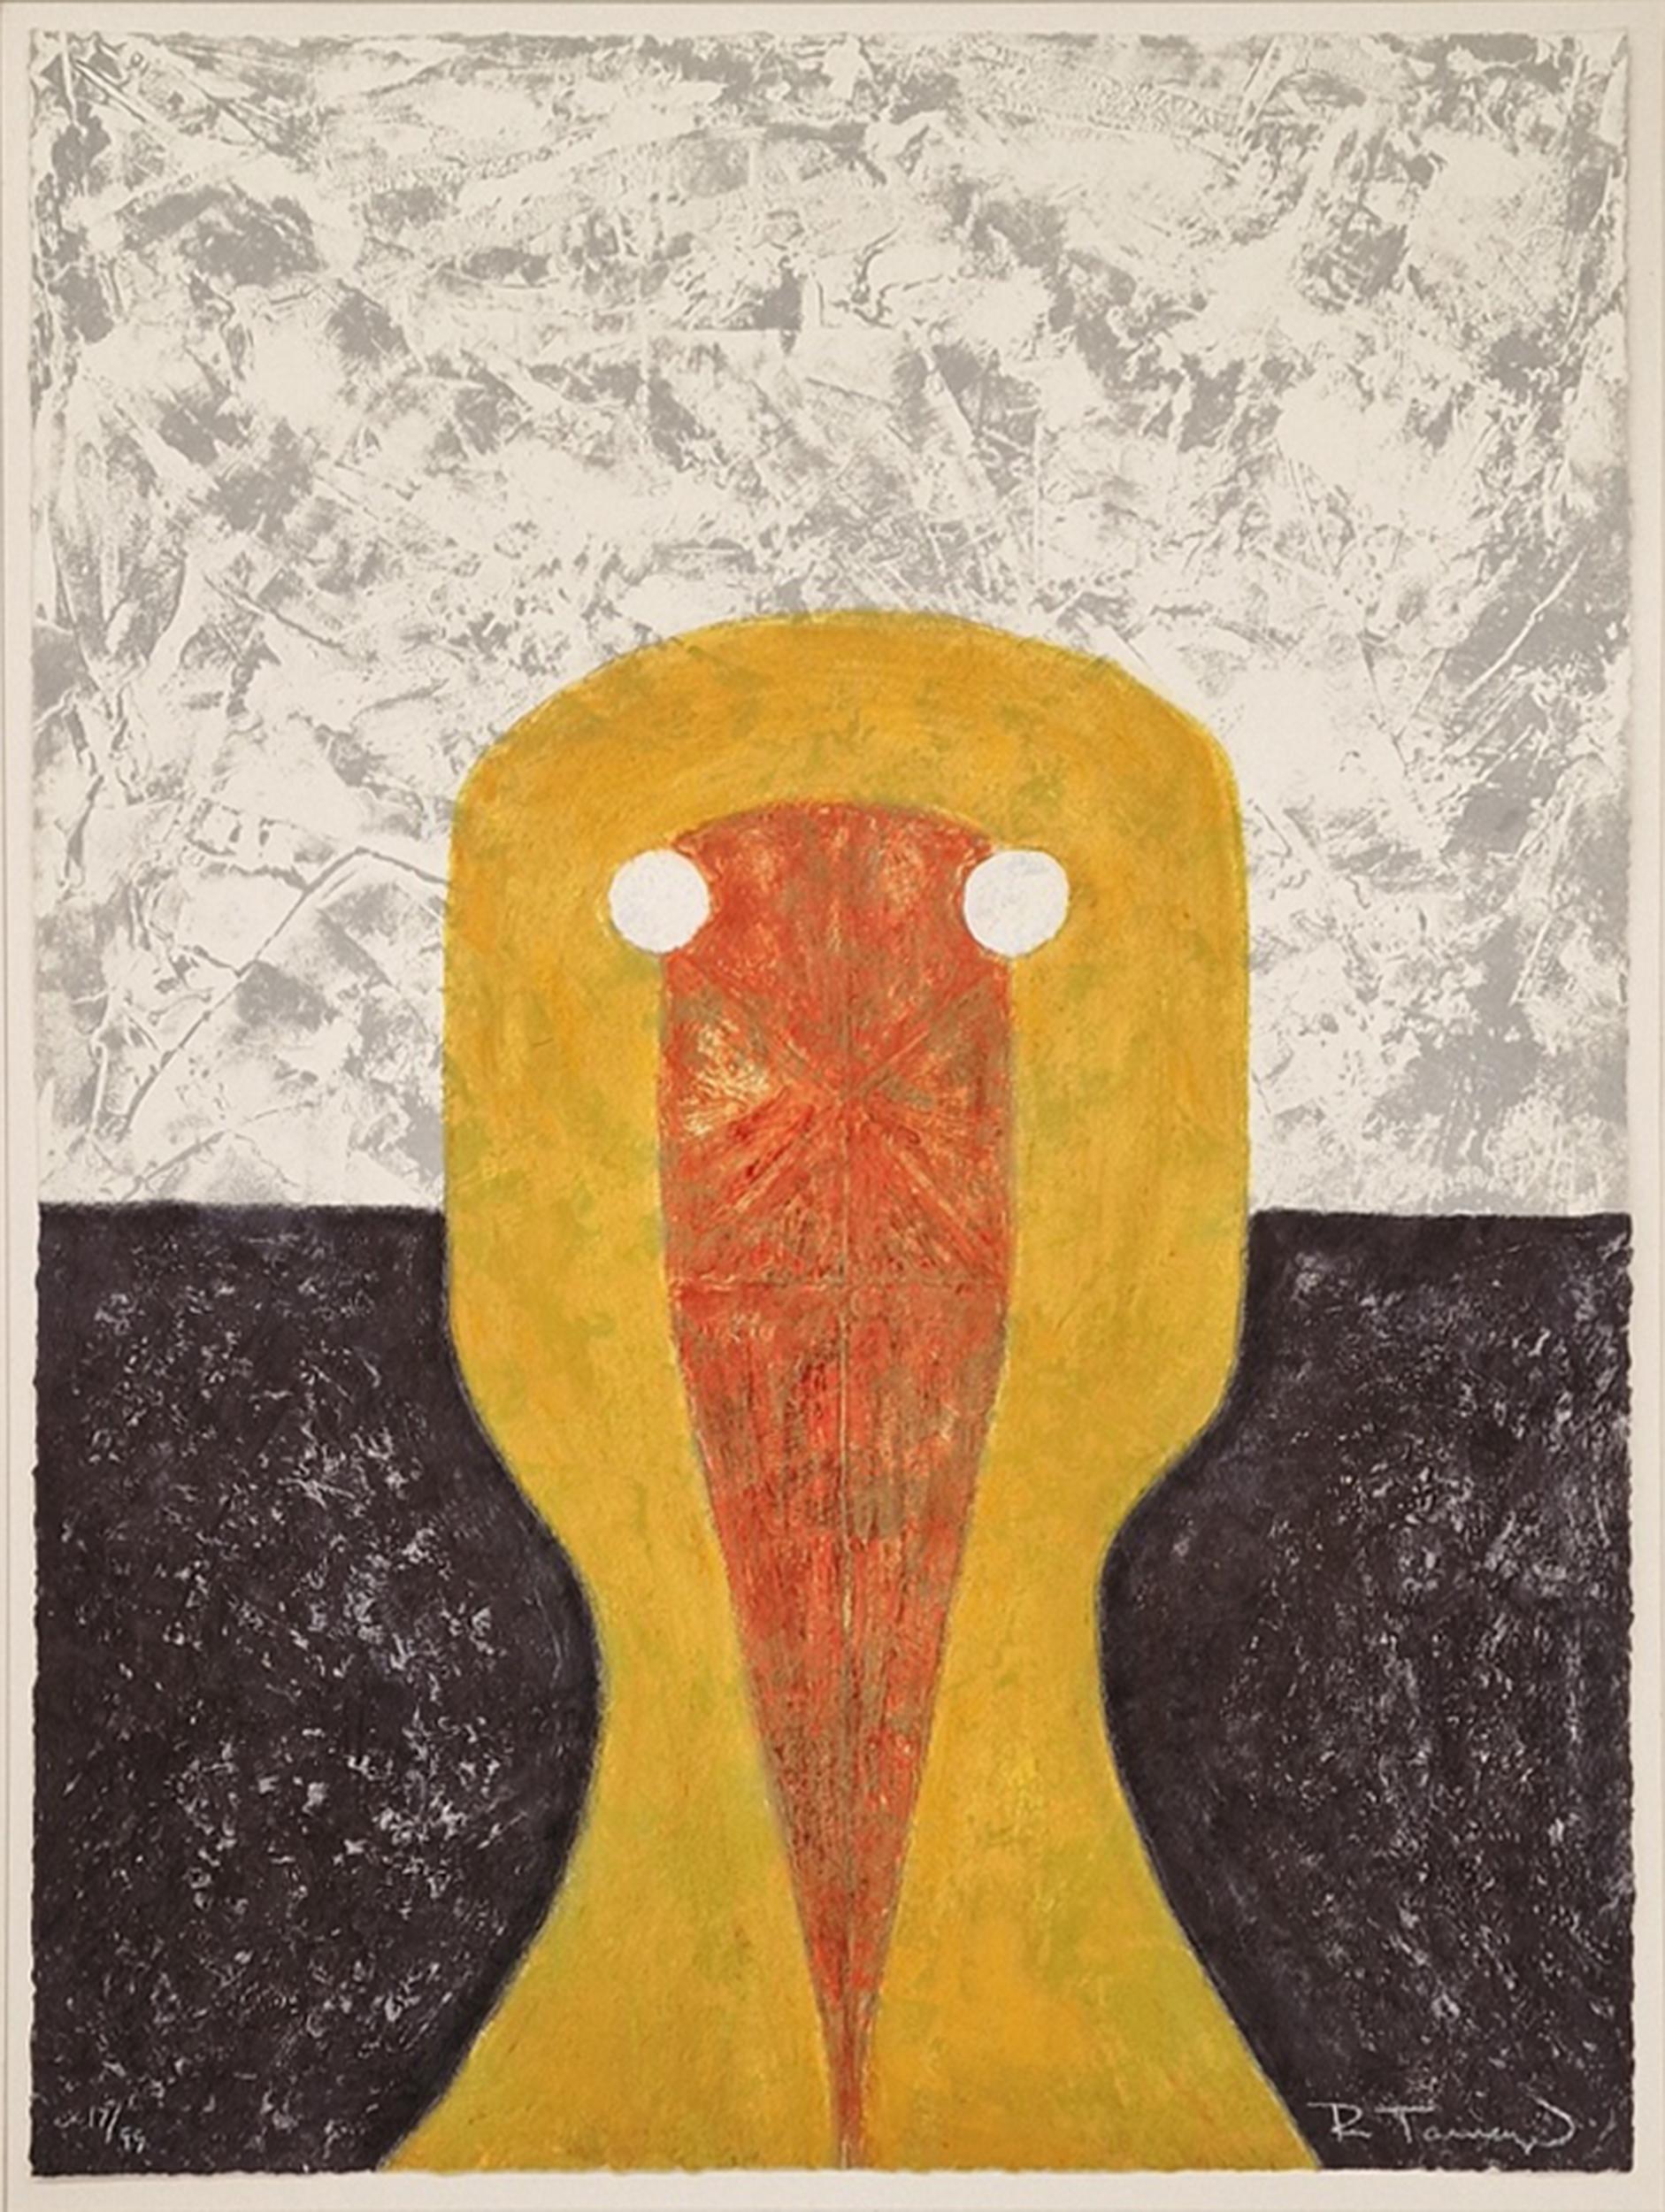 A Surrealist etching by Mexican artist Rufino Tamayo of a simple yellow figure with a bird beak against a white background, staring at the viewer with piercing white eyes. This piece is 17 of 99 numbered editions. This piece is signed in pencil by